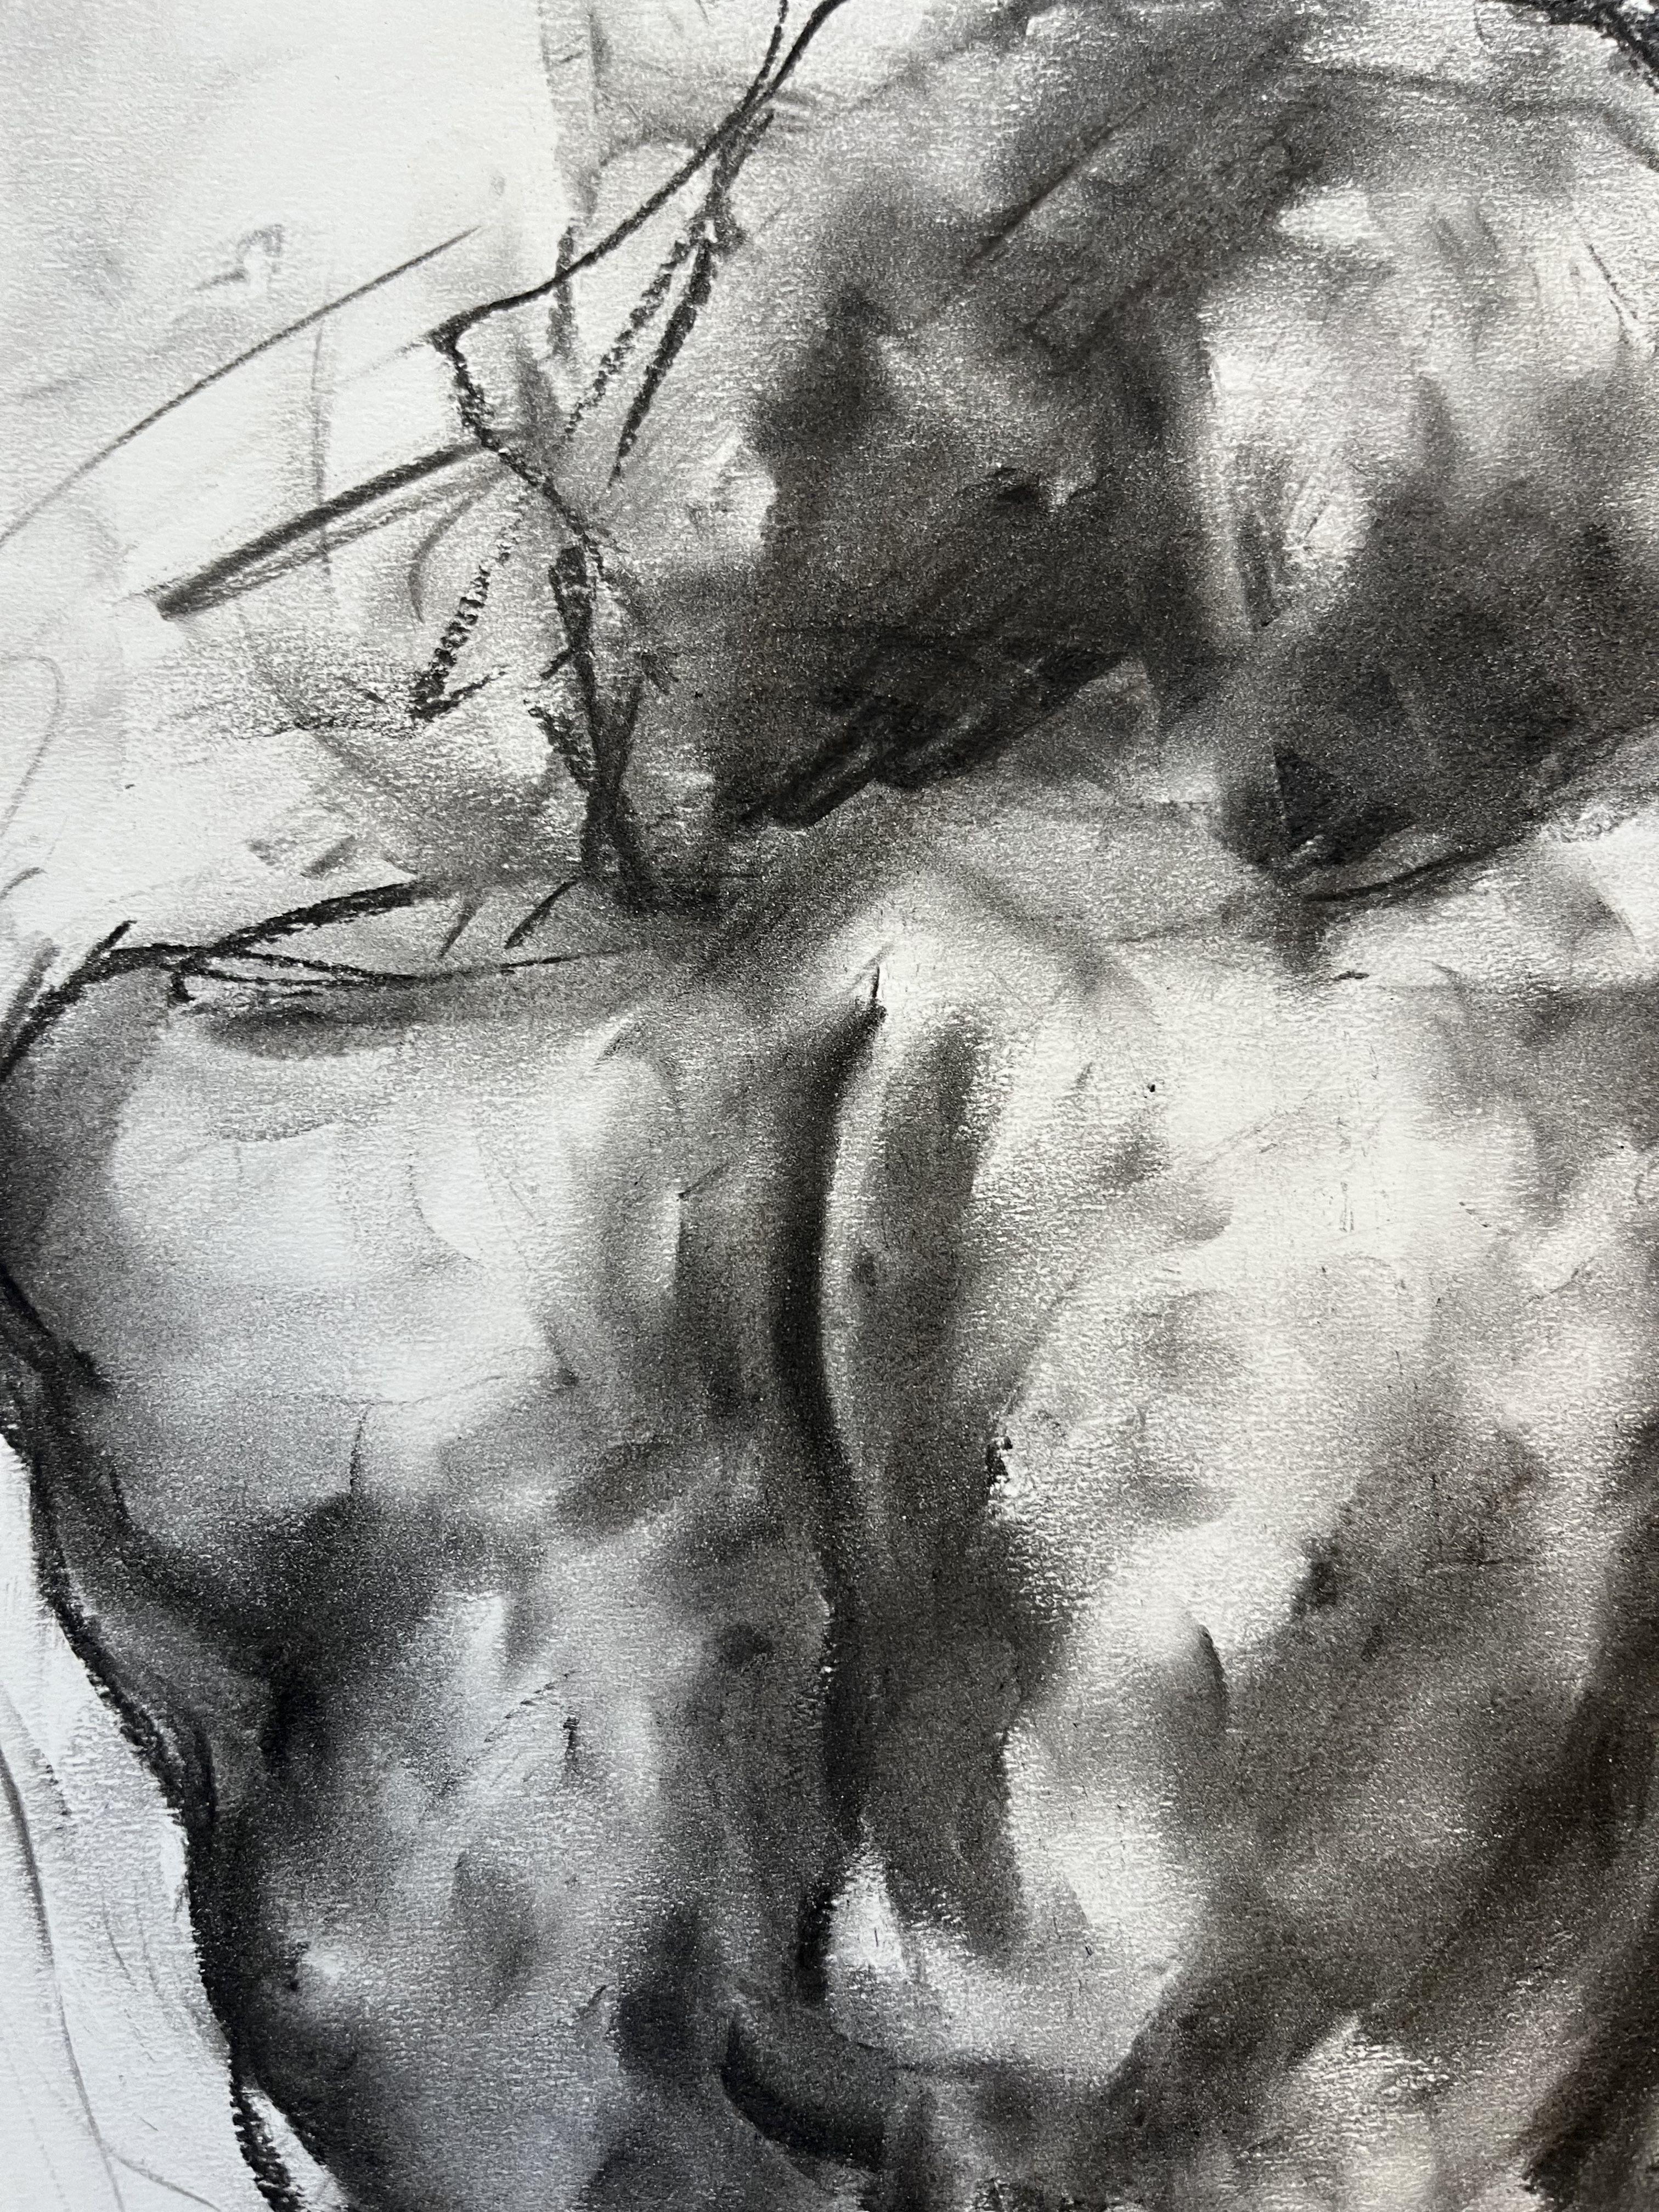 Closed, Drawing, Charcoal on Paper - Impressionist Art by James Shipton